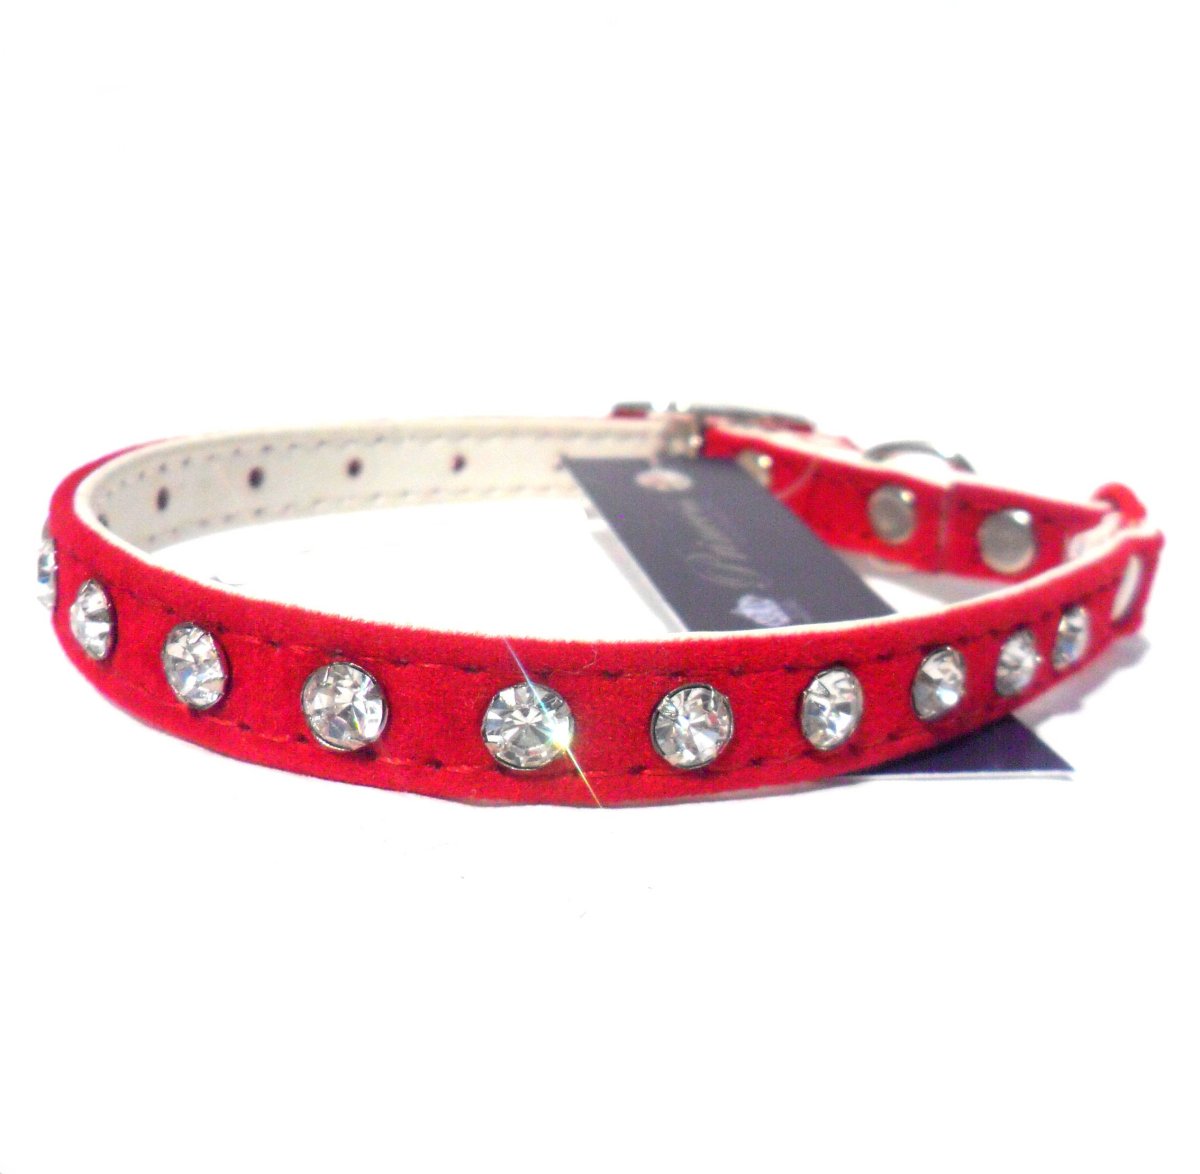 Majestic Crystal Cat Collar Cat Collars | Clothes for Cats